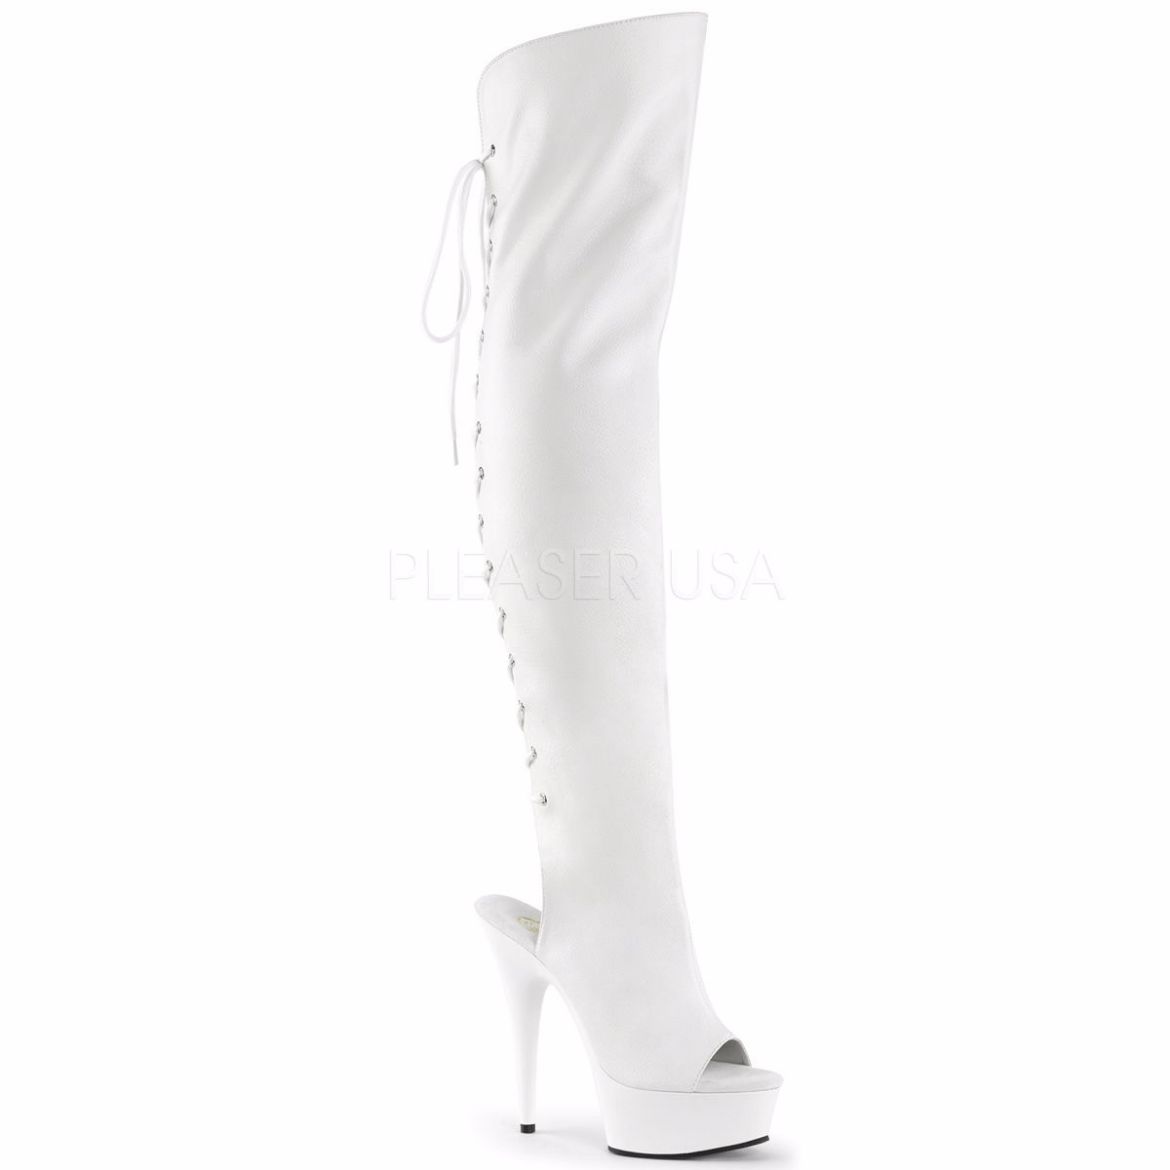 Product image of Pleaser Delight-3019 White Faux Leather/White, 6 inch (15.2 cm) Heel, 1 3/4 inch (4.4 cm) Platform Thigh High Boot